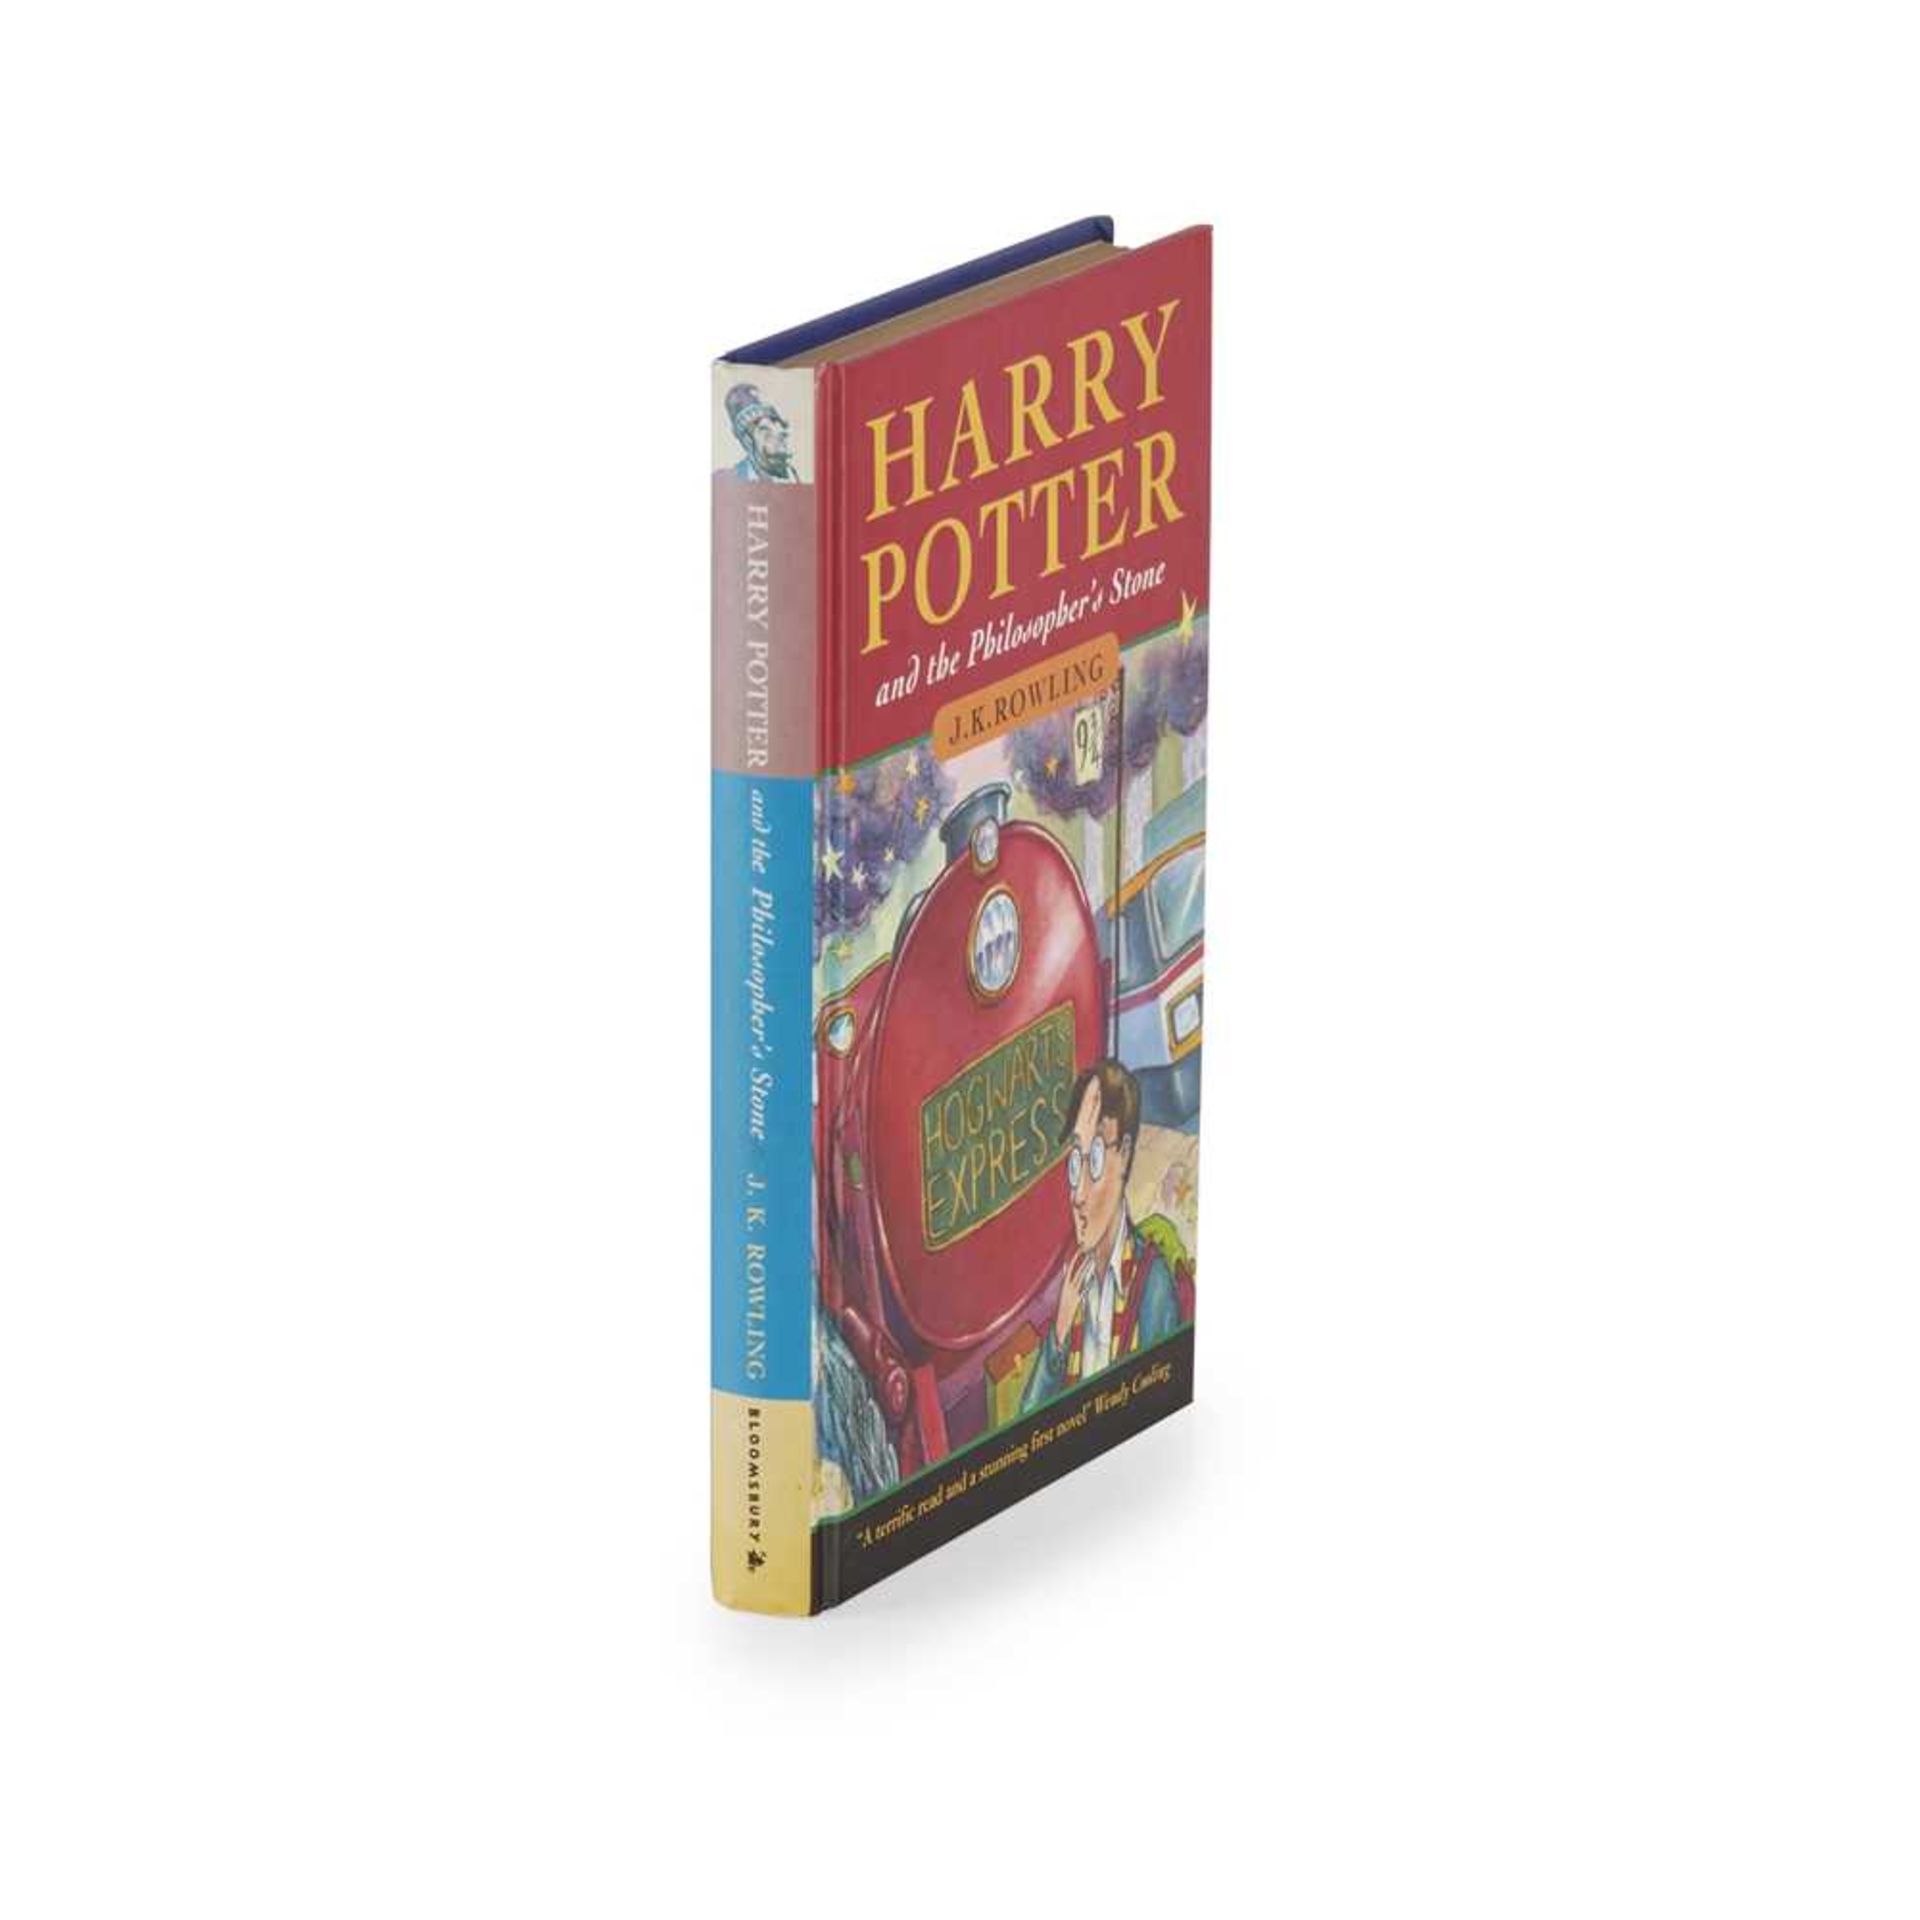 Rowling, J.K. Harry Potter and the Philosopher's Stone London: Bloomsbury, 1997. First edition,